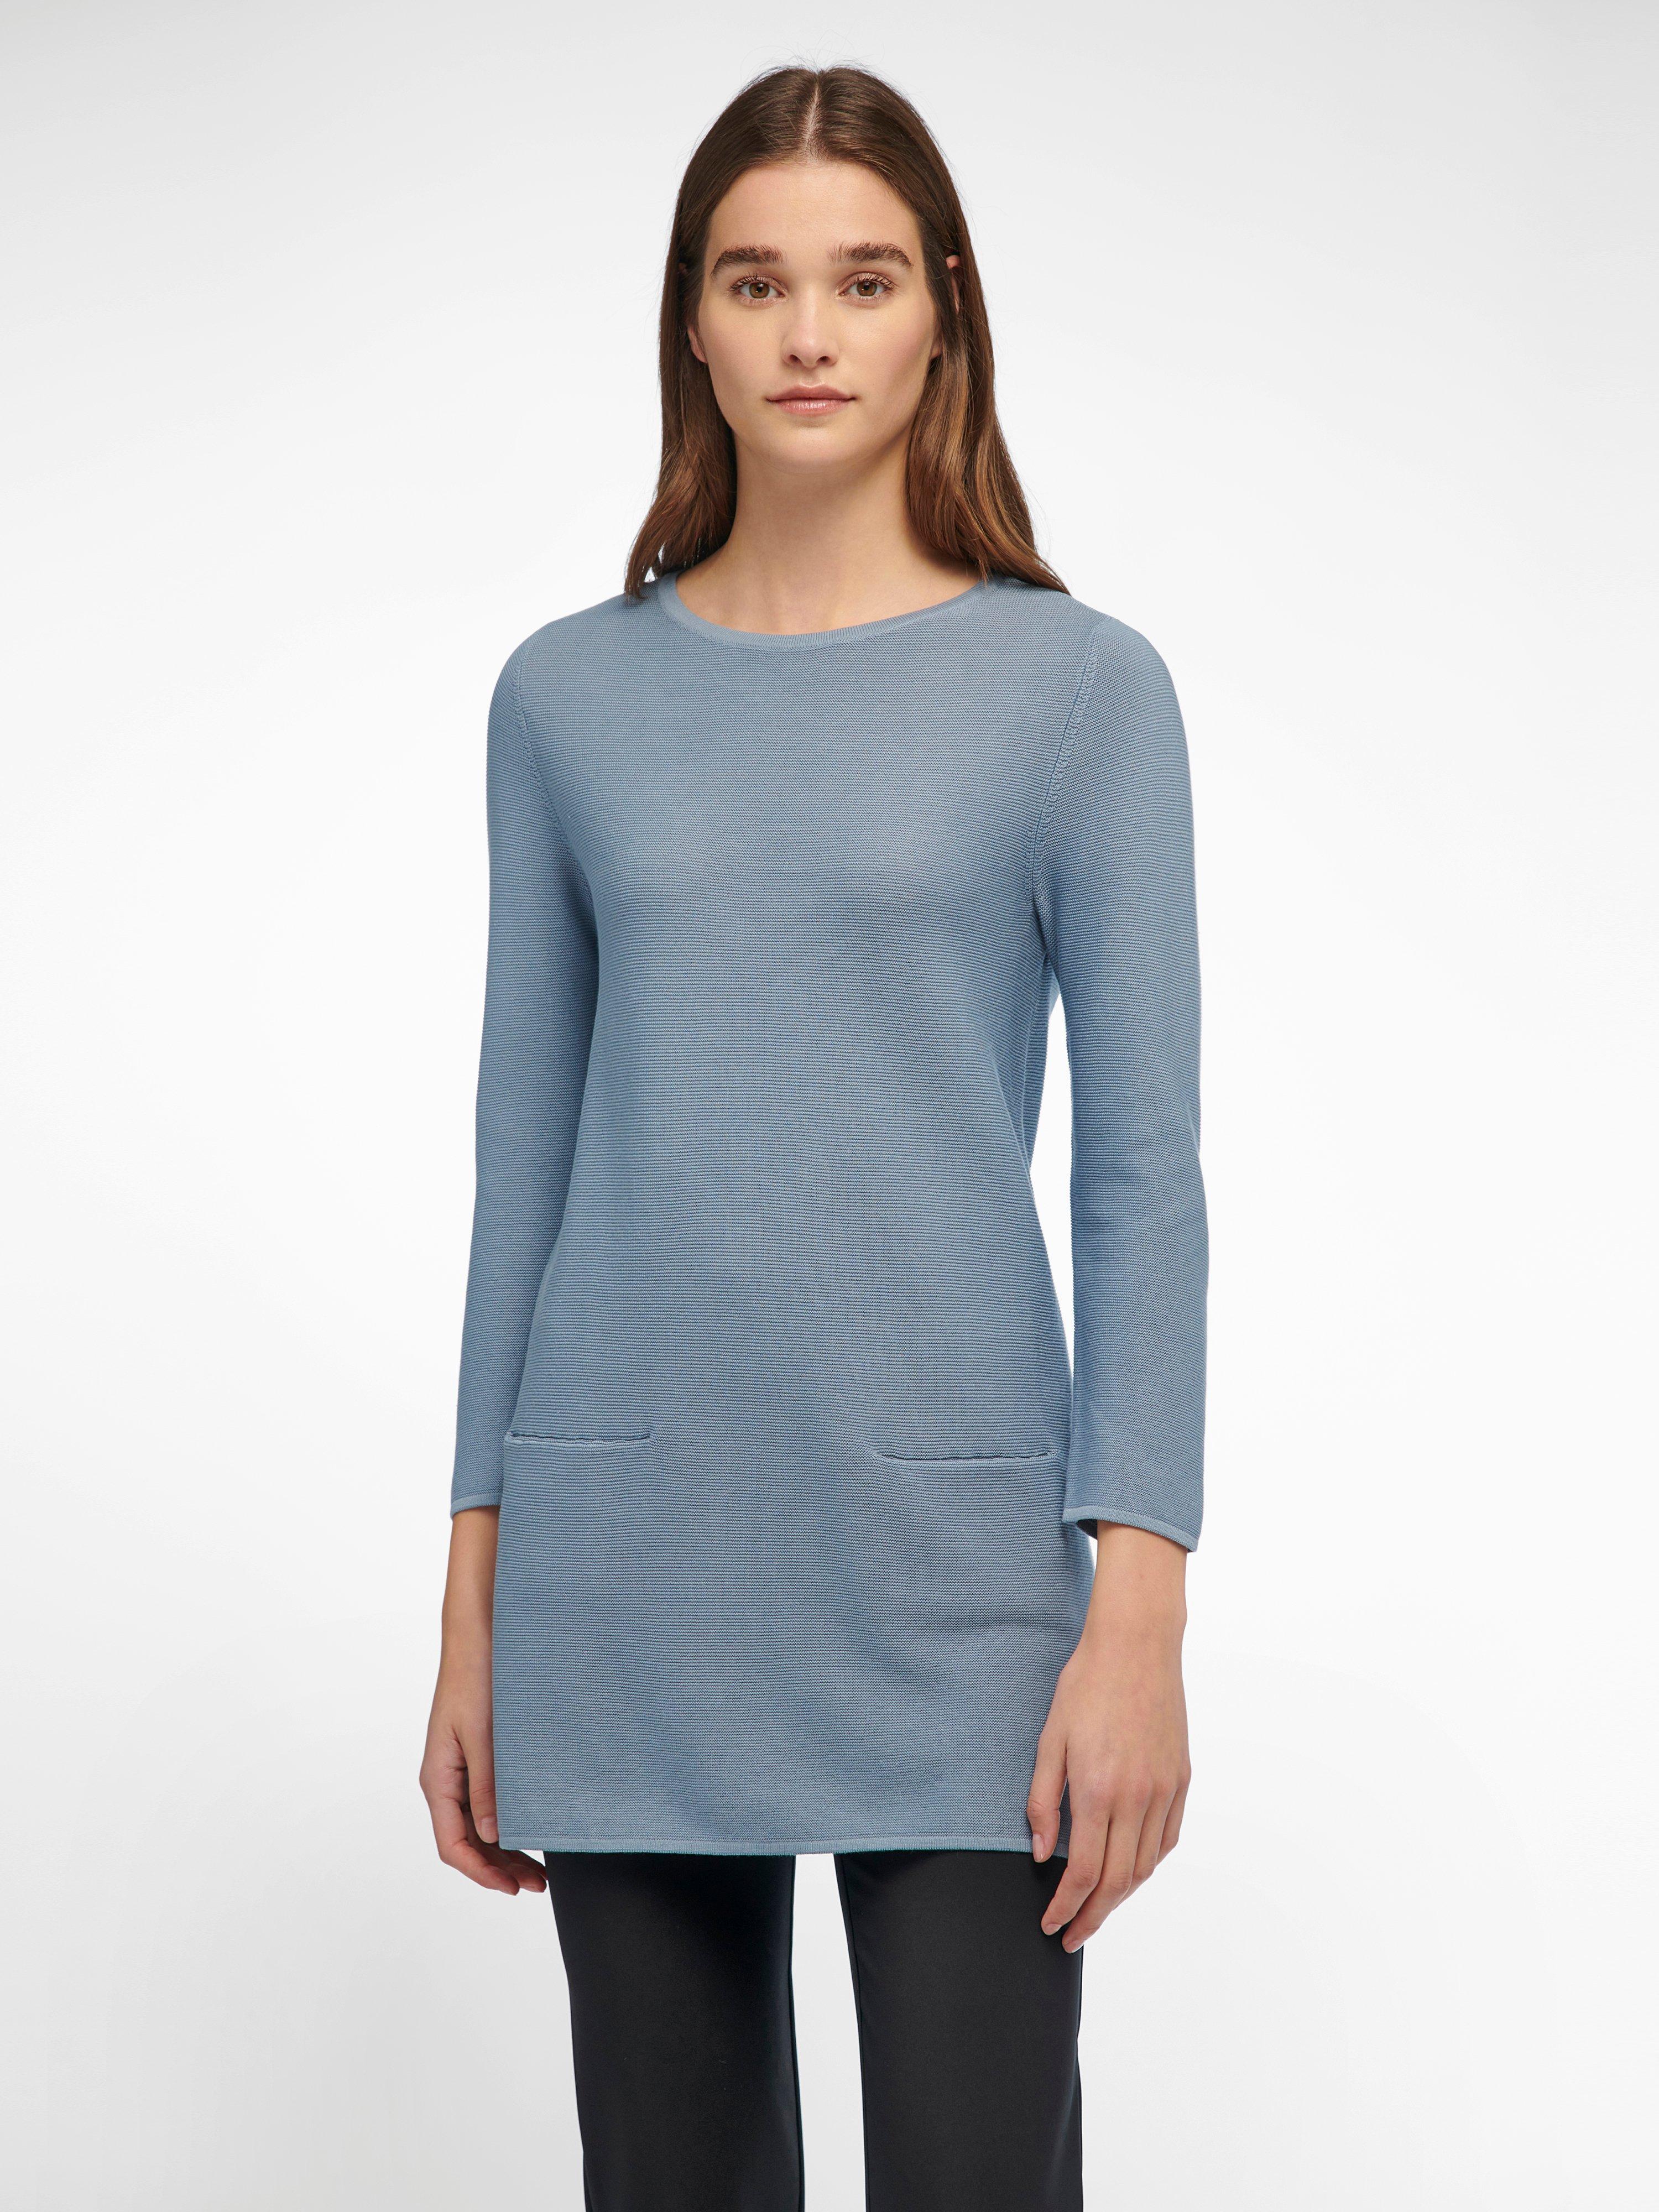 Peter Hahn - Le pull manches 7/8 100% coton